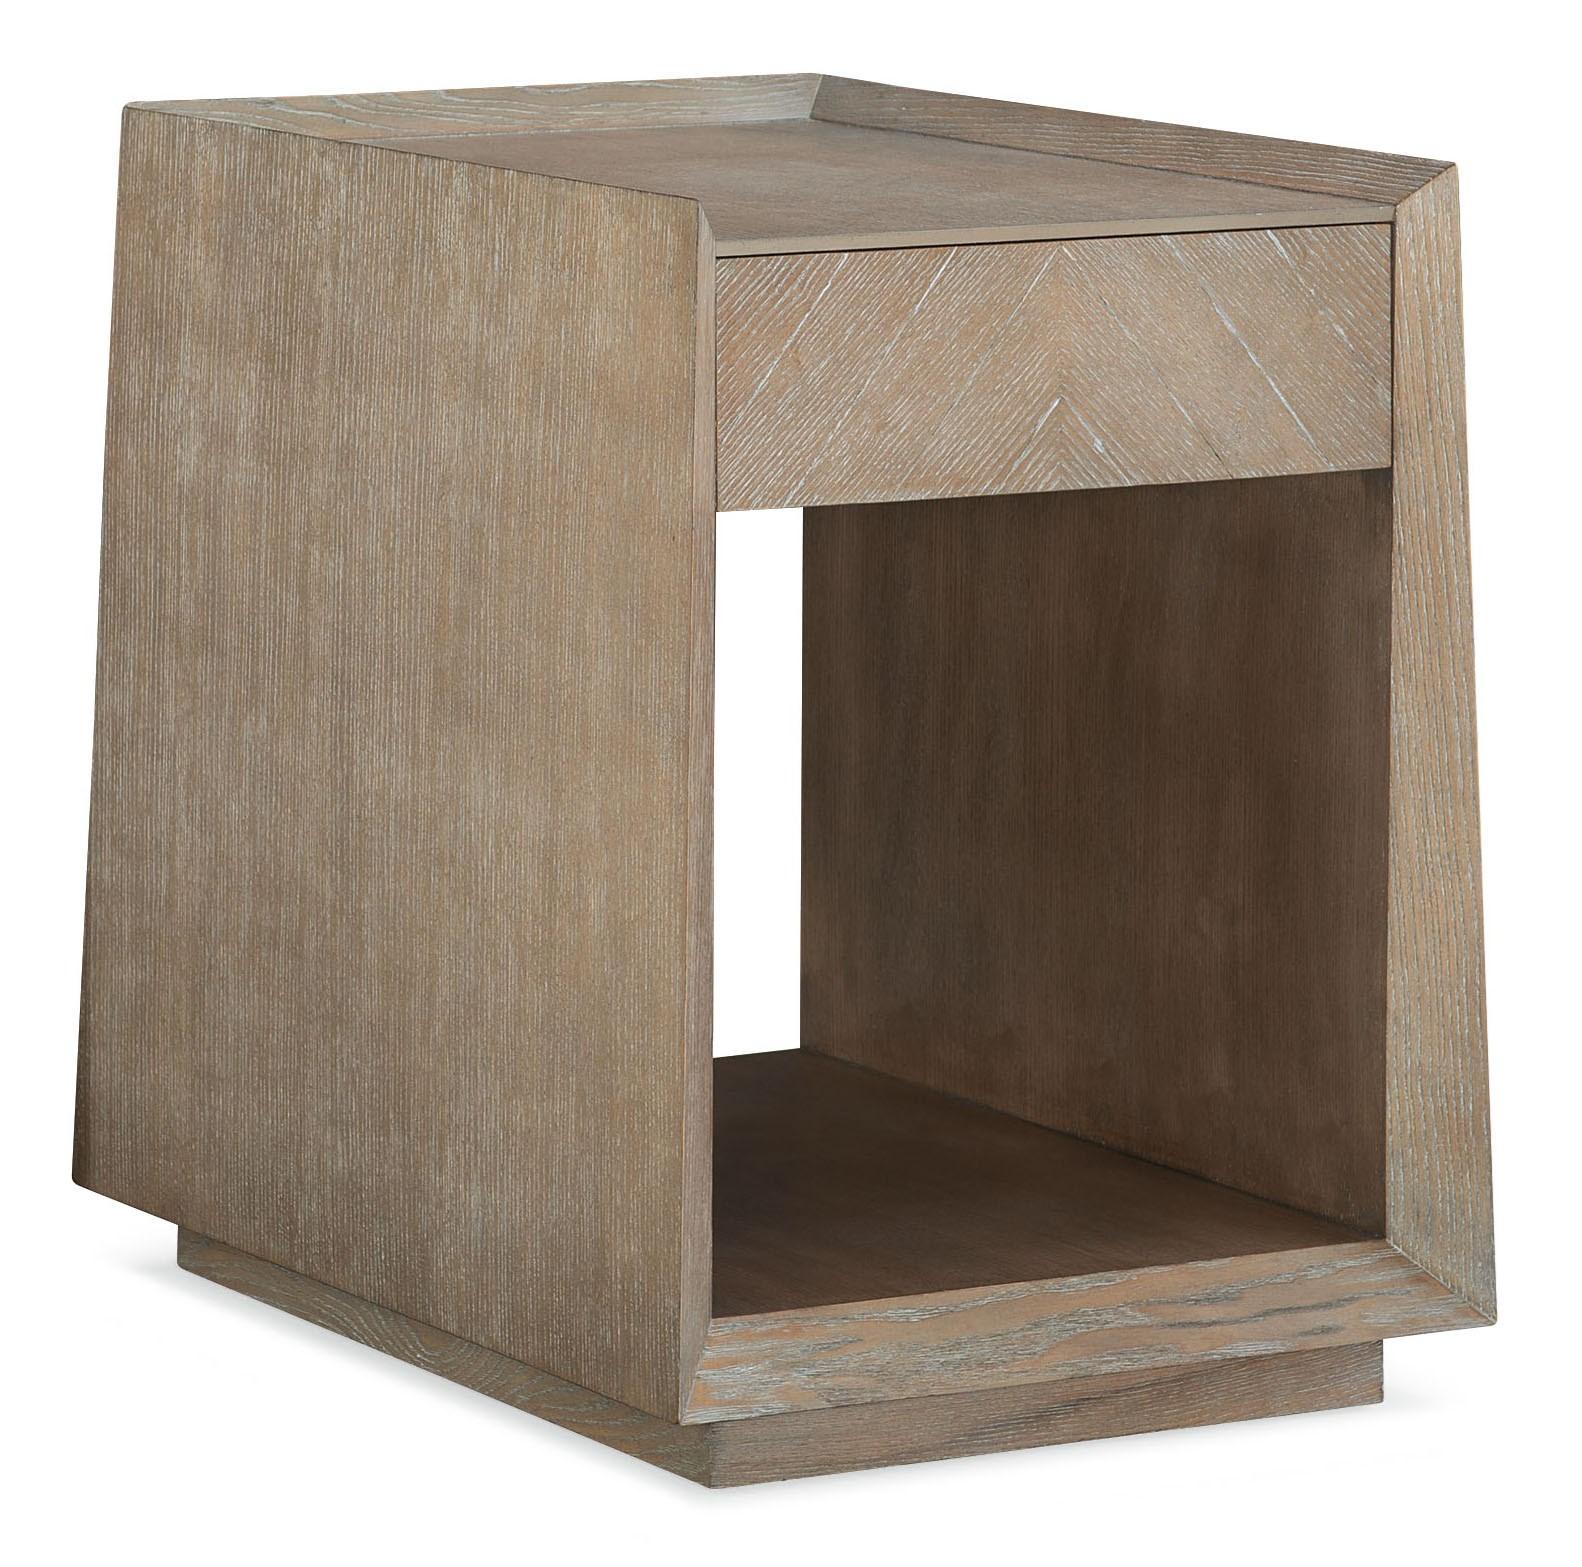 Contemporary End Table BRIDGES CLA-420-418 in Driftwood 